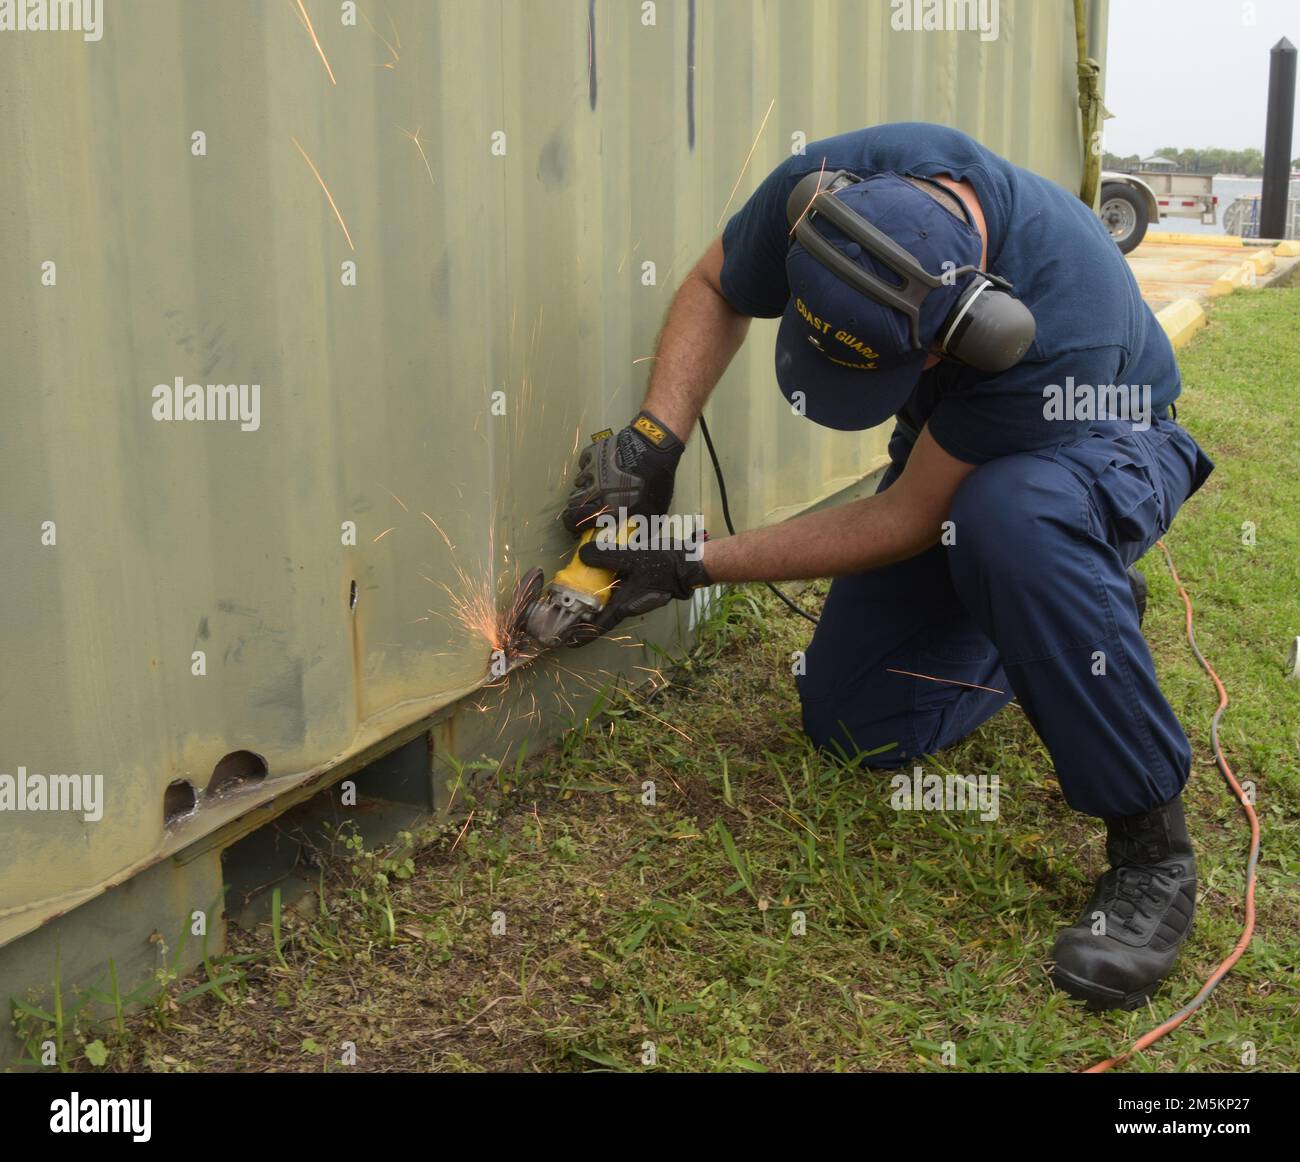 U.S. Coast Guard Petty Officer 3rd Class Hunter Parker, a damage controlman assigned to Sector Jacksonville, Florida, removes any rust from the outside of portable restroom facility being built at Sector Jacksonville, March 23, 2022. The portable restroom can be shipped to a location within the Sector Jacksonville area of responsibility where permanent restrooms are unavailable. Stock Photo